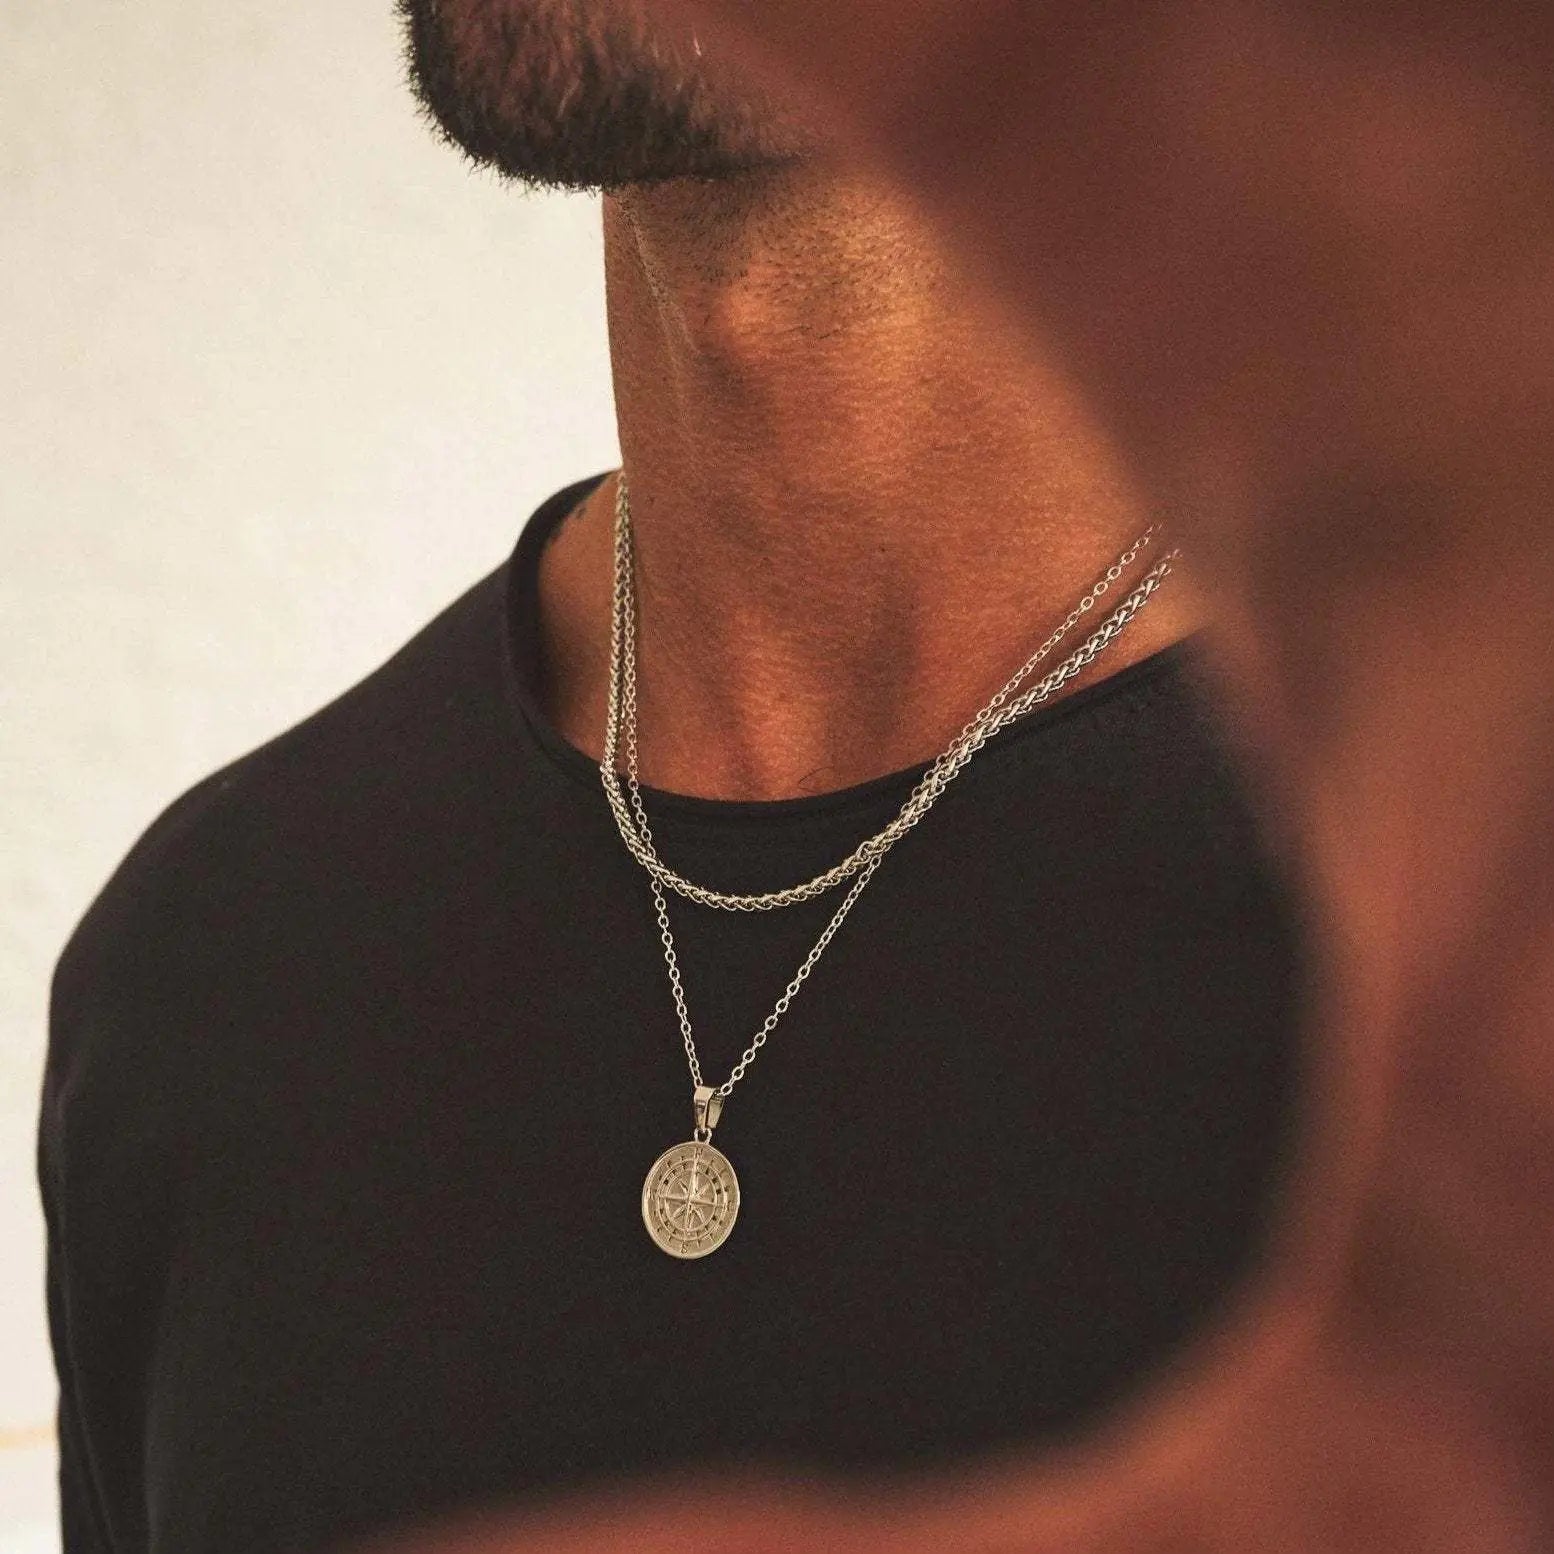 Vnox Layered Necklaces for Men